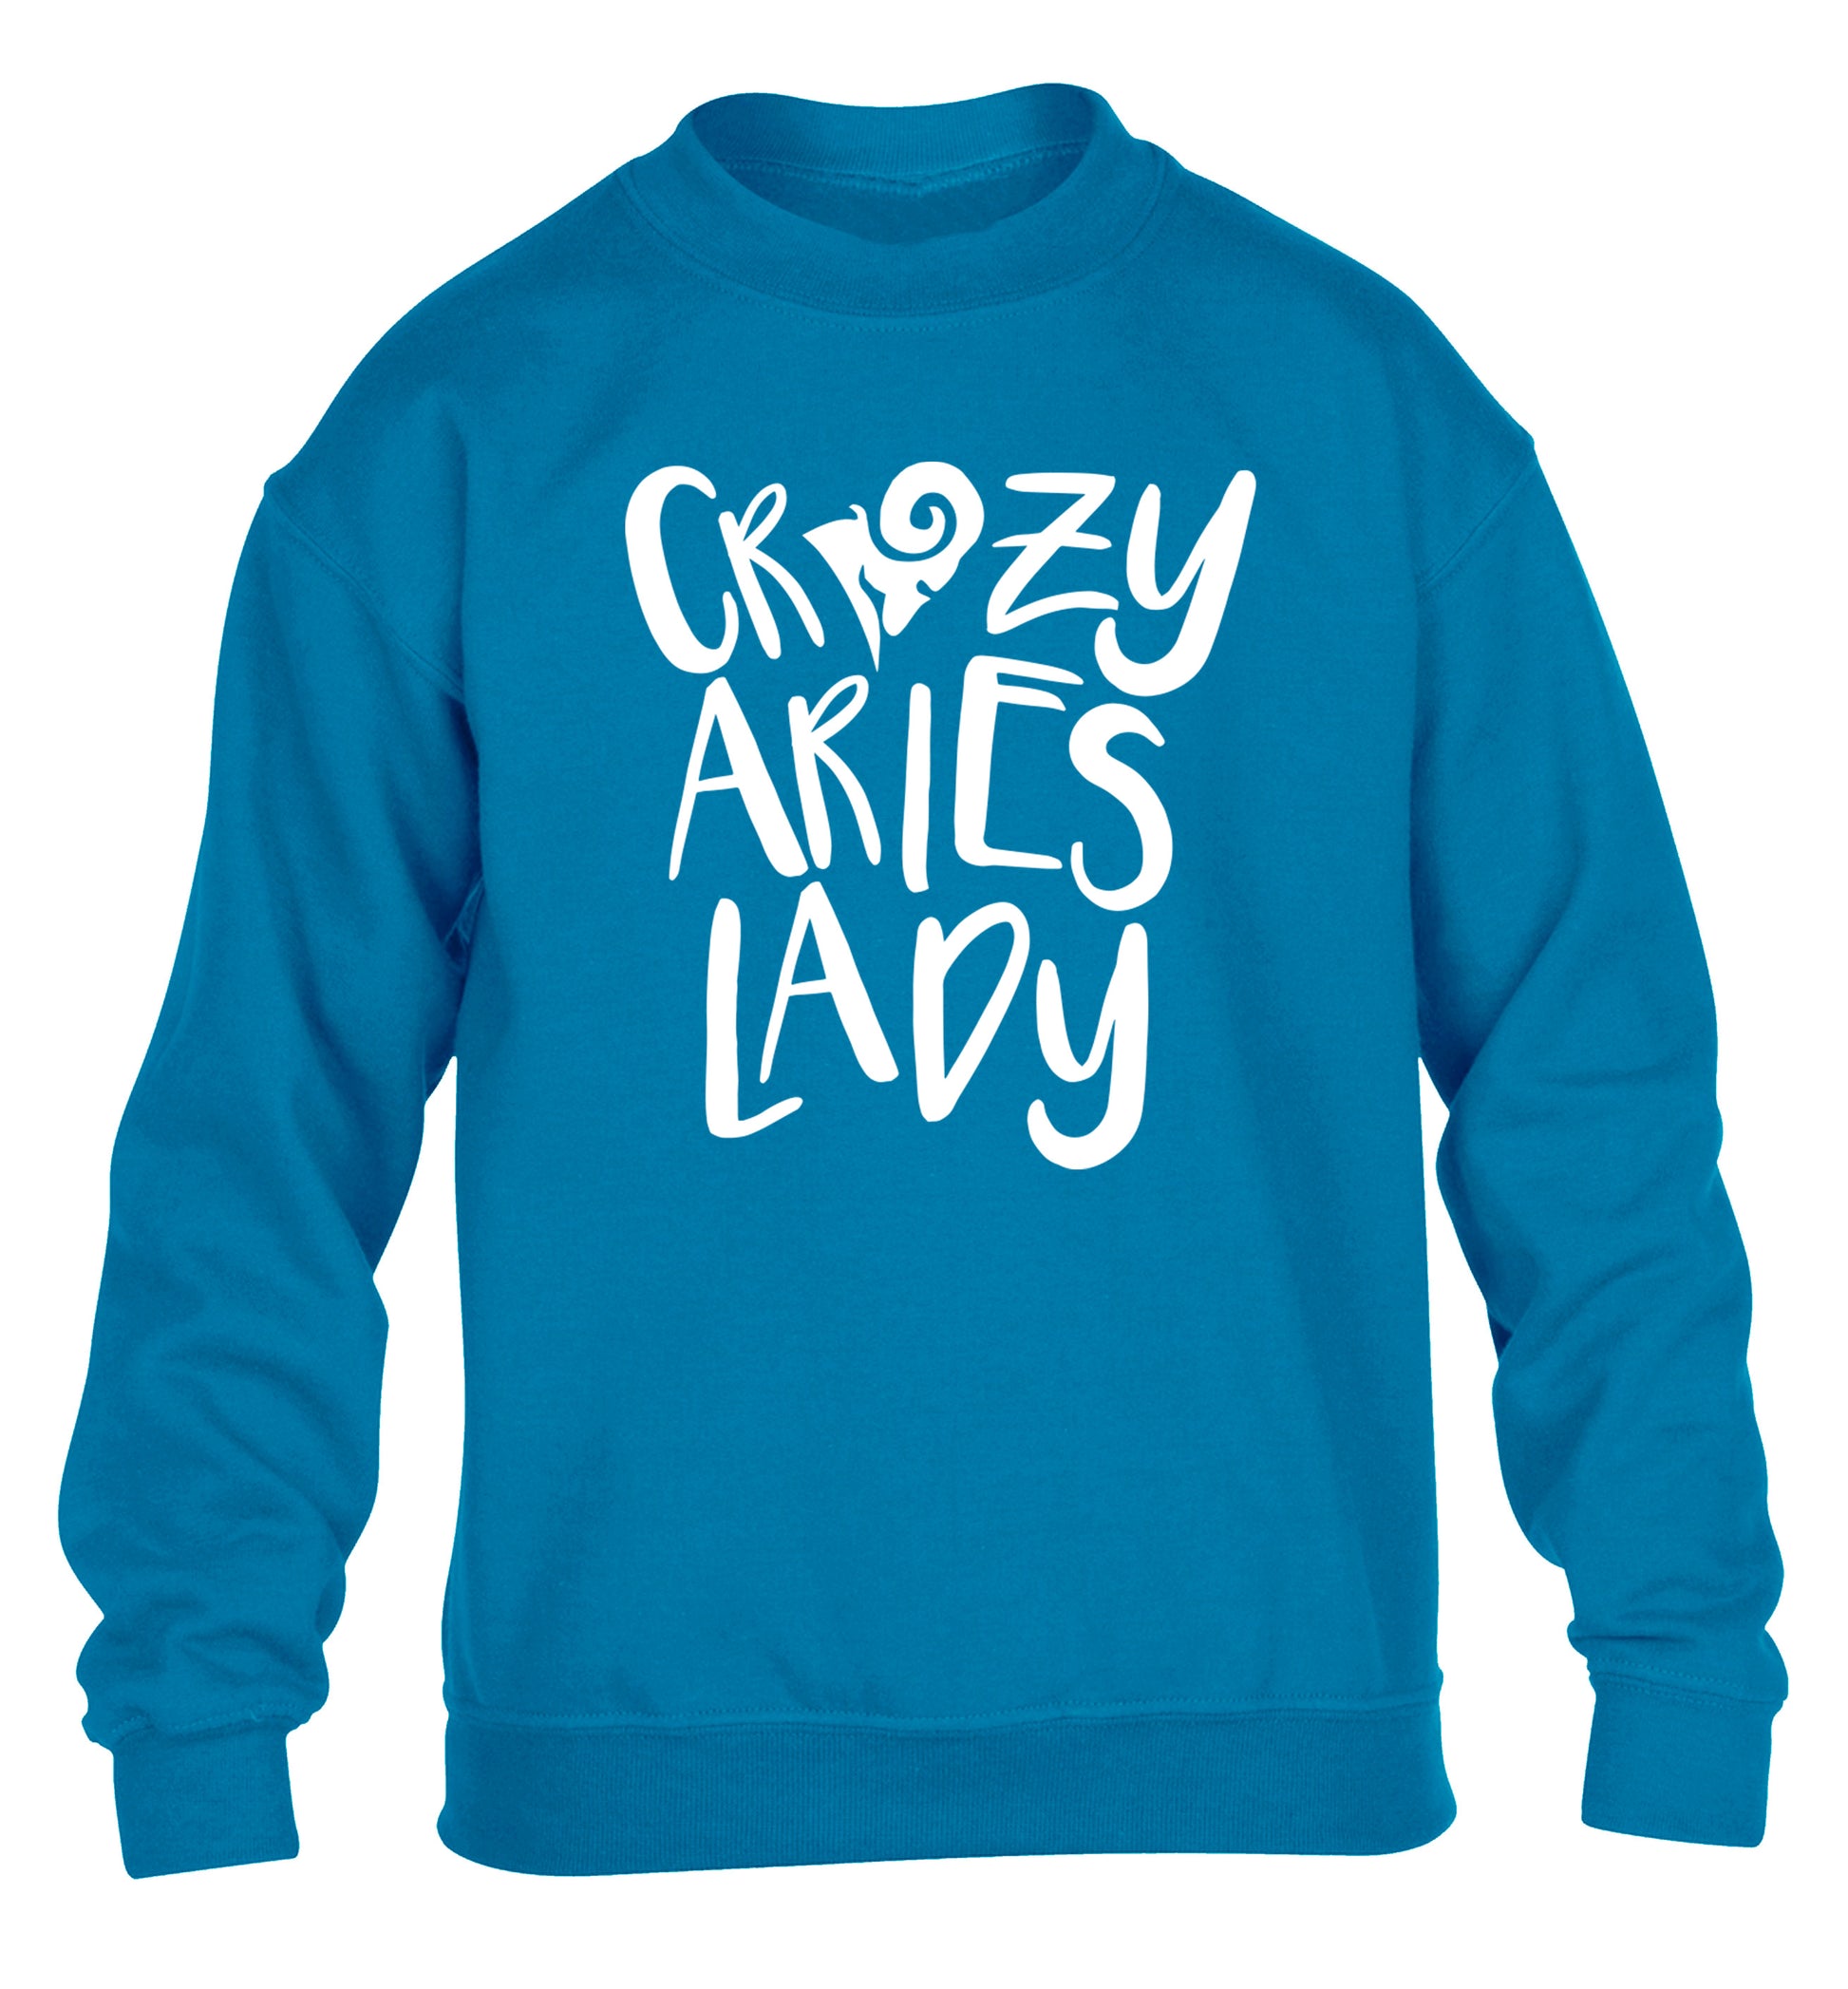 Crazy aries lady children's blue sweater 12-13 Years